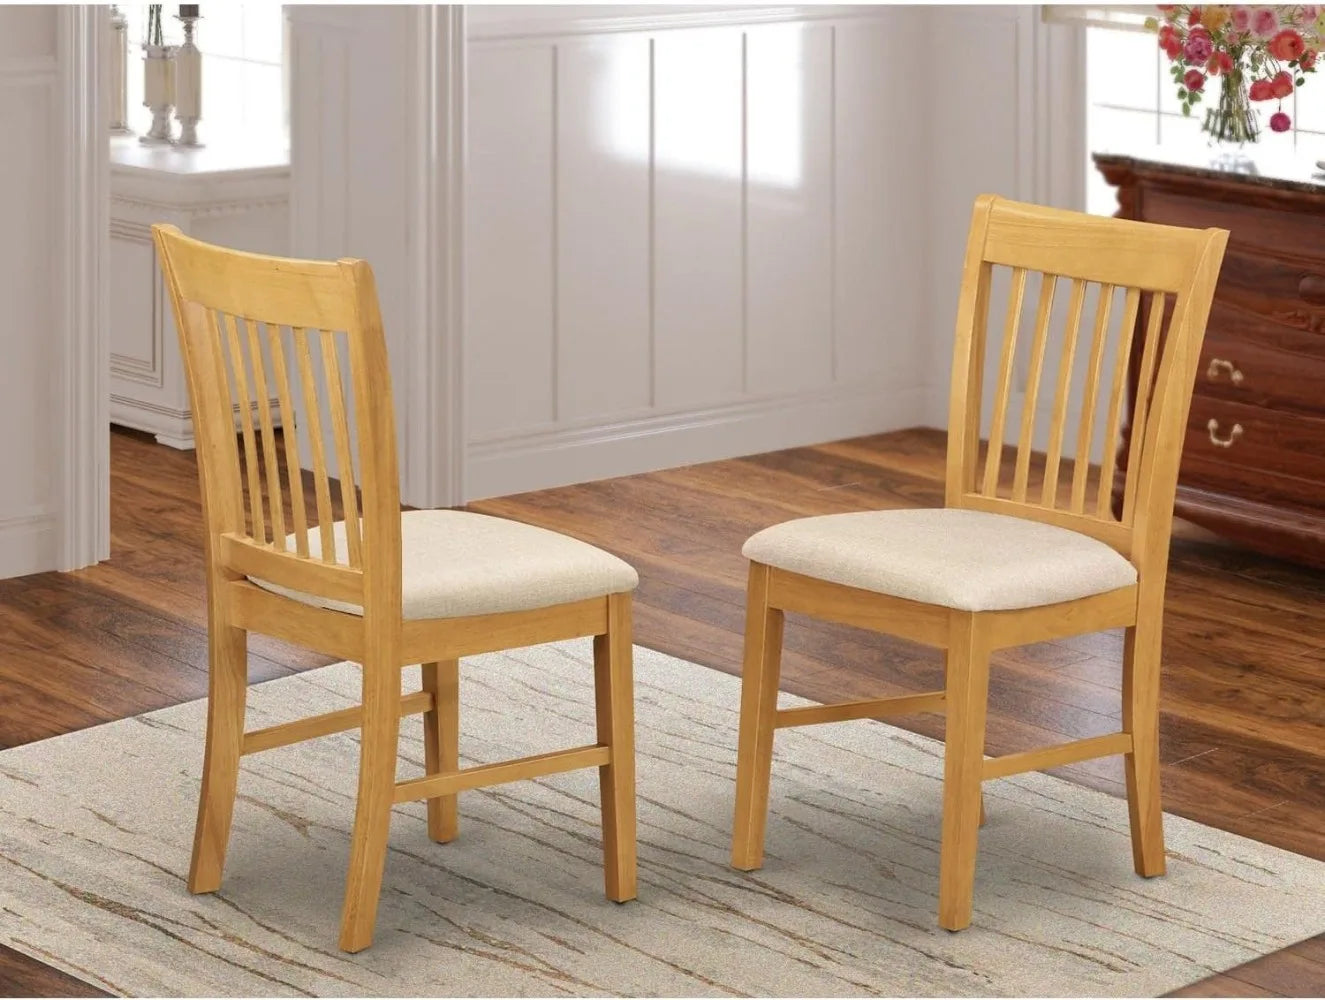 Upholstered Wooden Kitchen Dining Chairs, Set of 2-Dining Room Chairs-NOFRAN Furniture